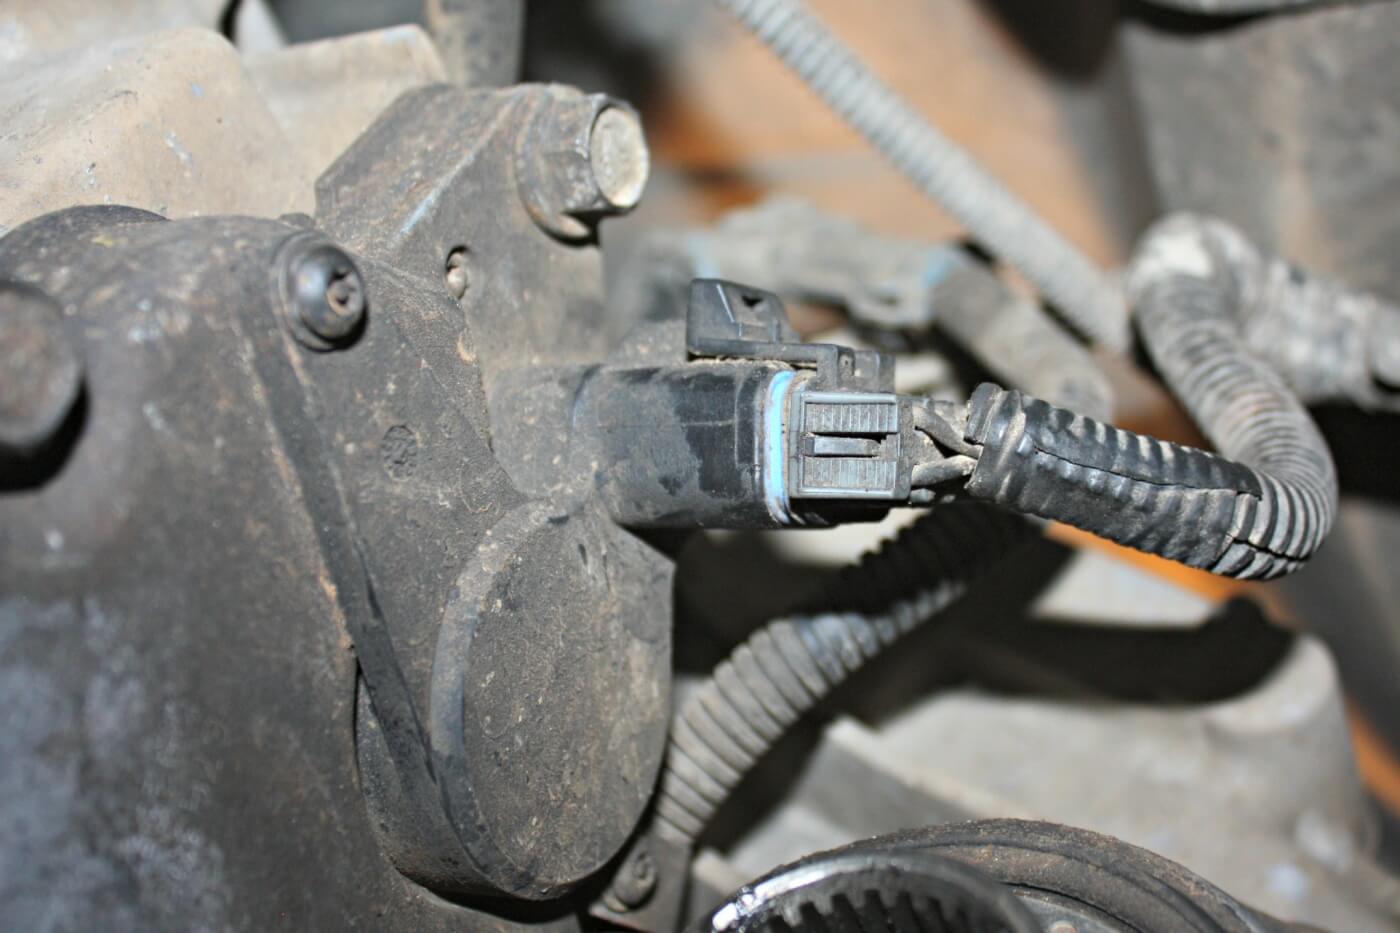 6. The next step in the removal process is to disconnect all the electronics, like this one shown plugged into the electronic shift selector. There are also a couple cables that are mounted to the transfer case that will need to be removed.